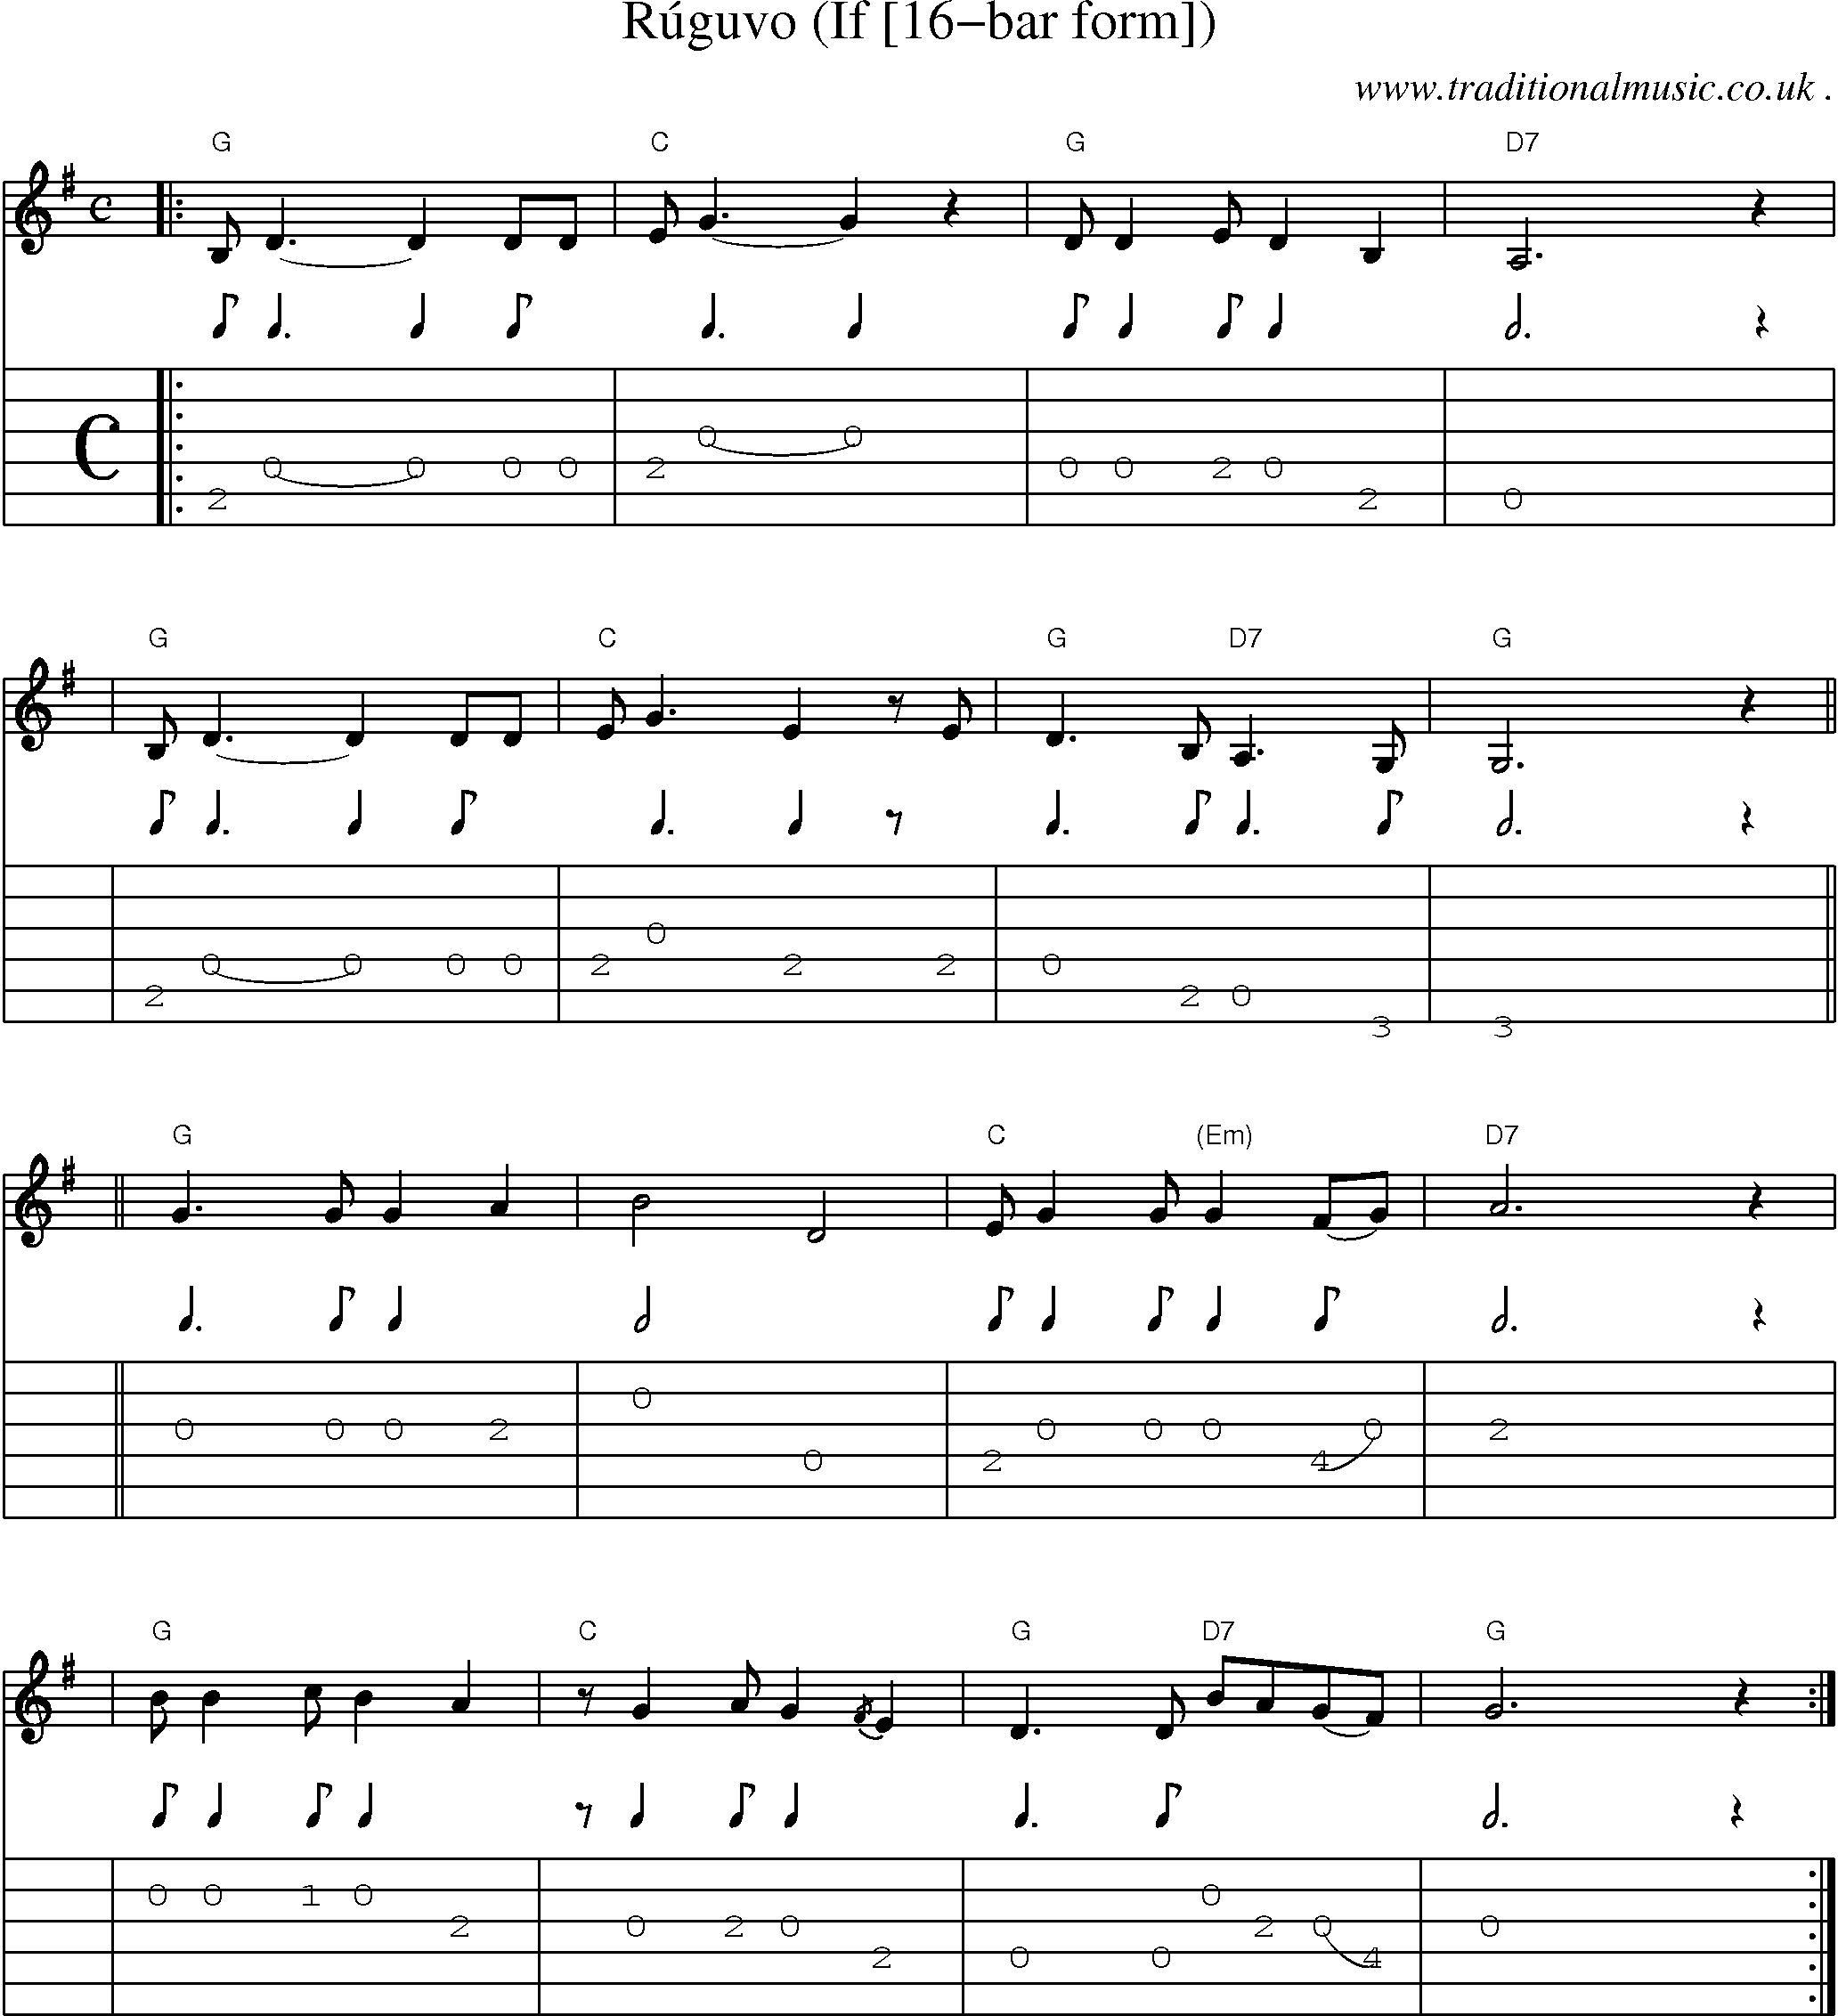 Sheet-music  score, Chords and Guitar Tabs for Ruguvo If [16-bar Form]